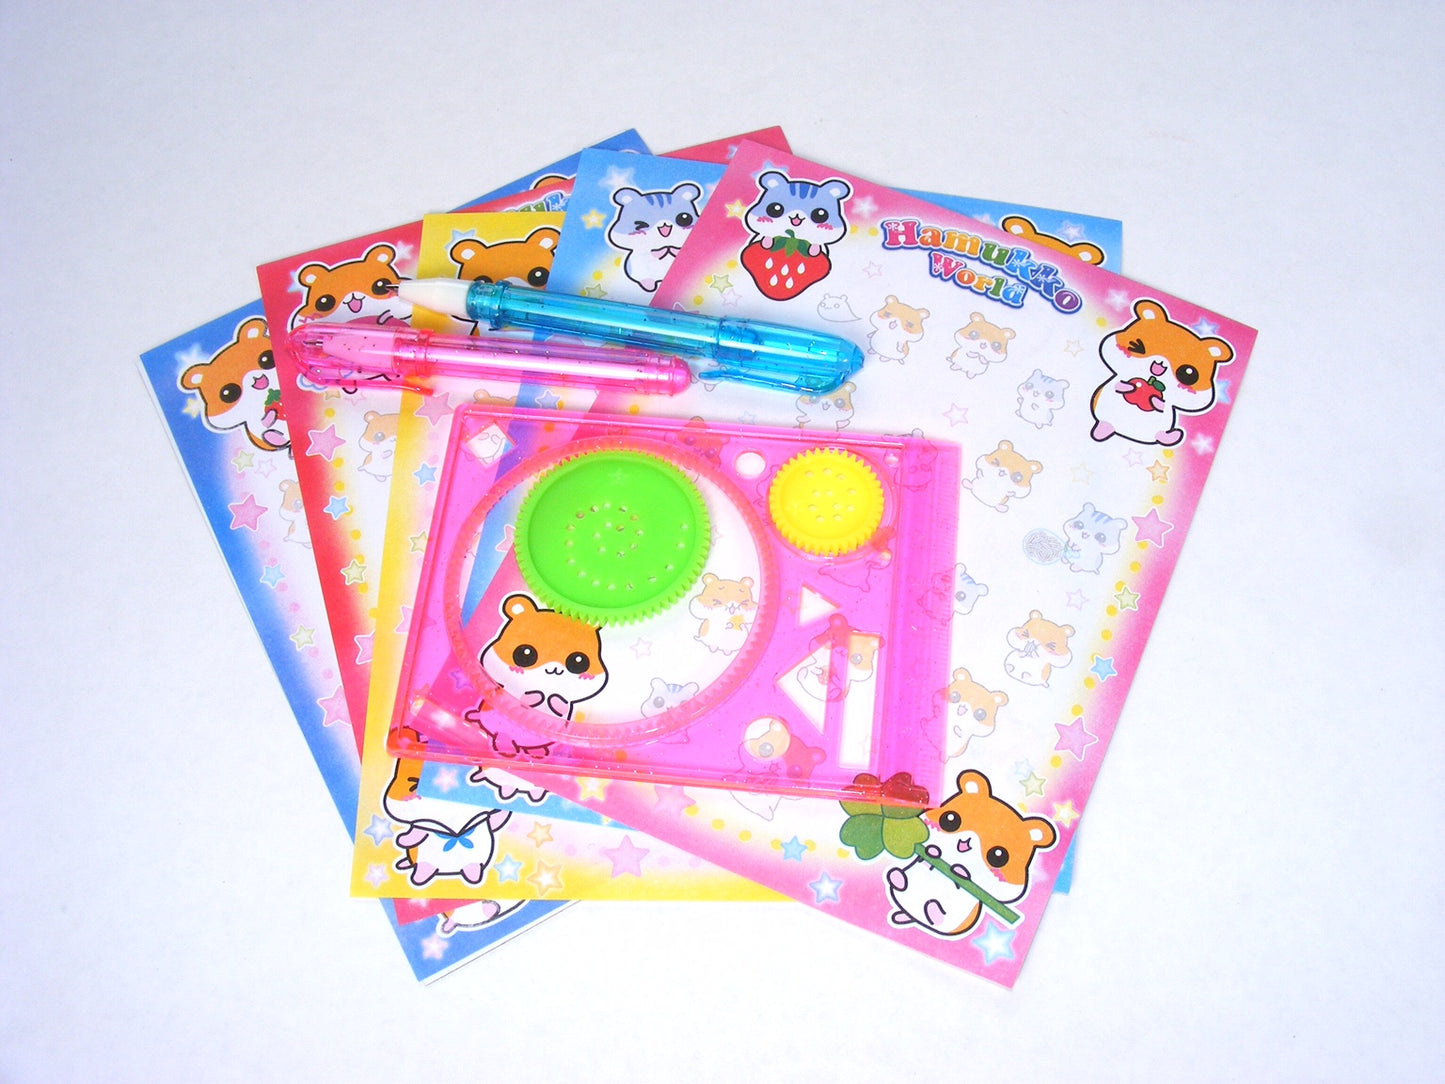 X 885792 Artist set with circle templates-DISCONTINUED